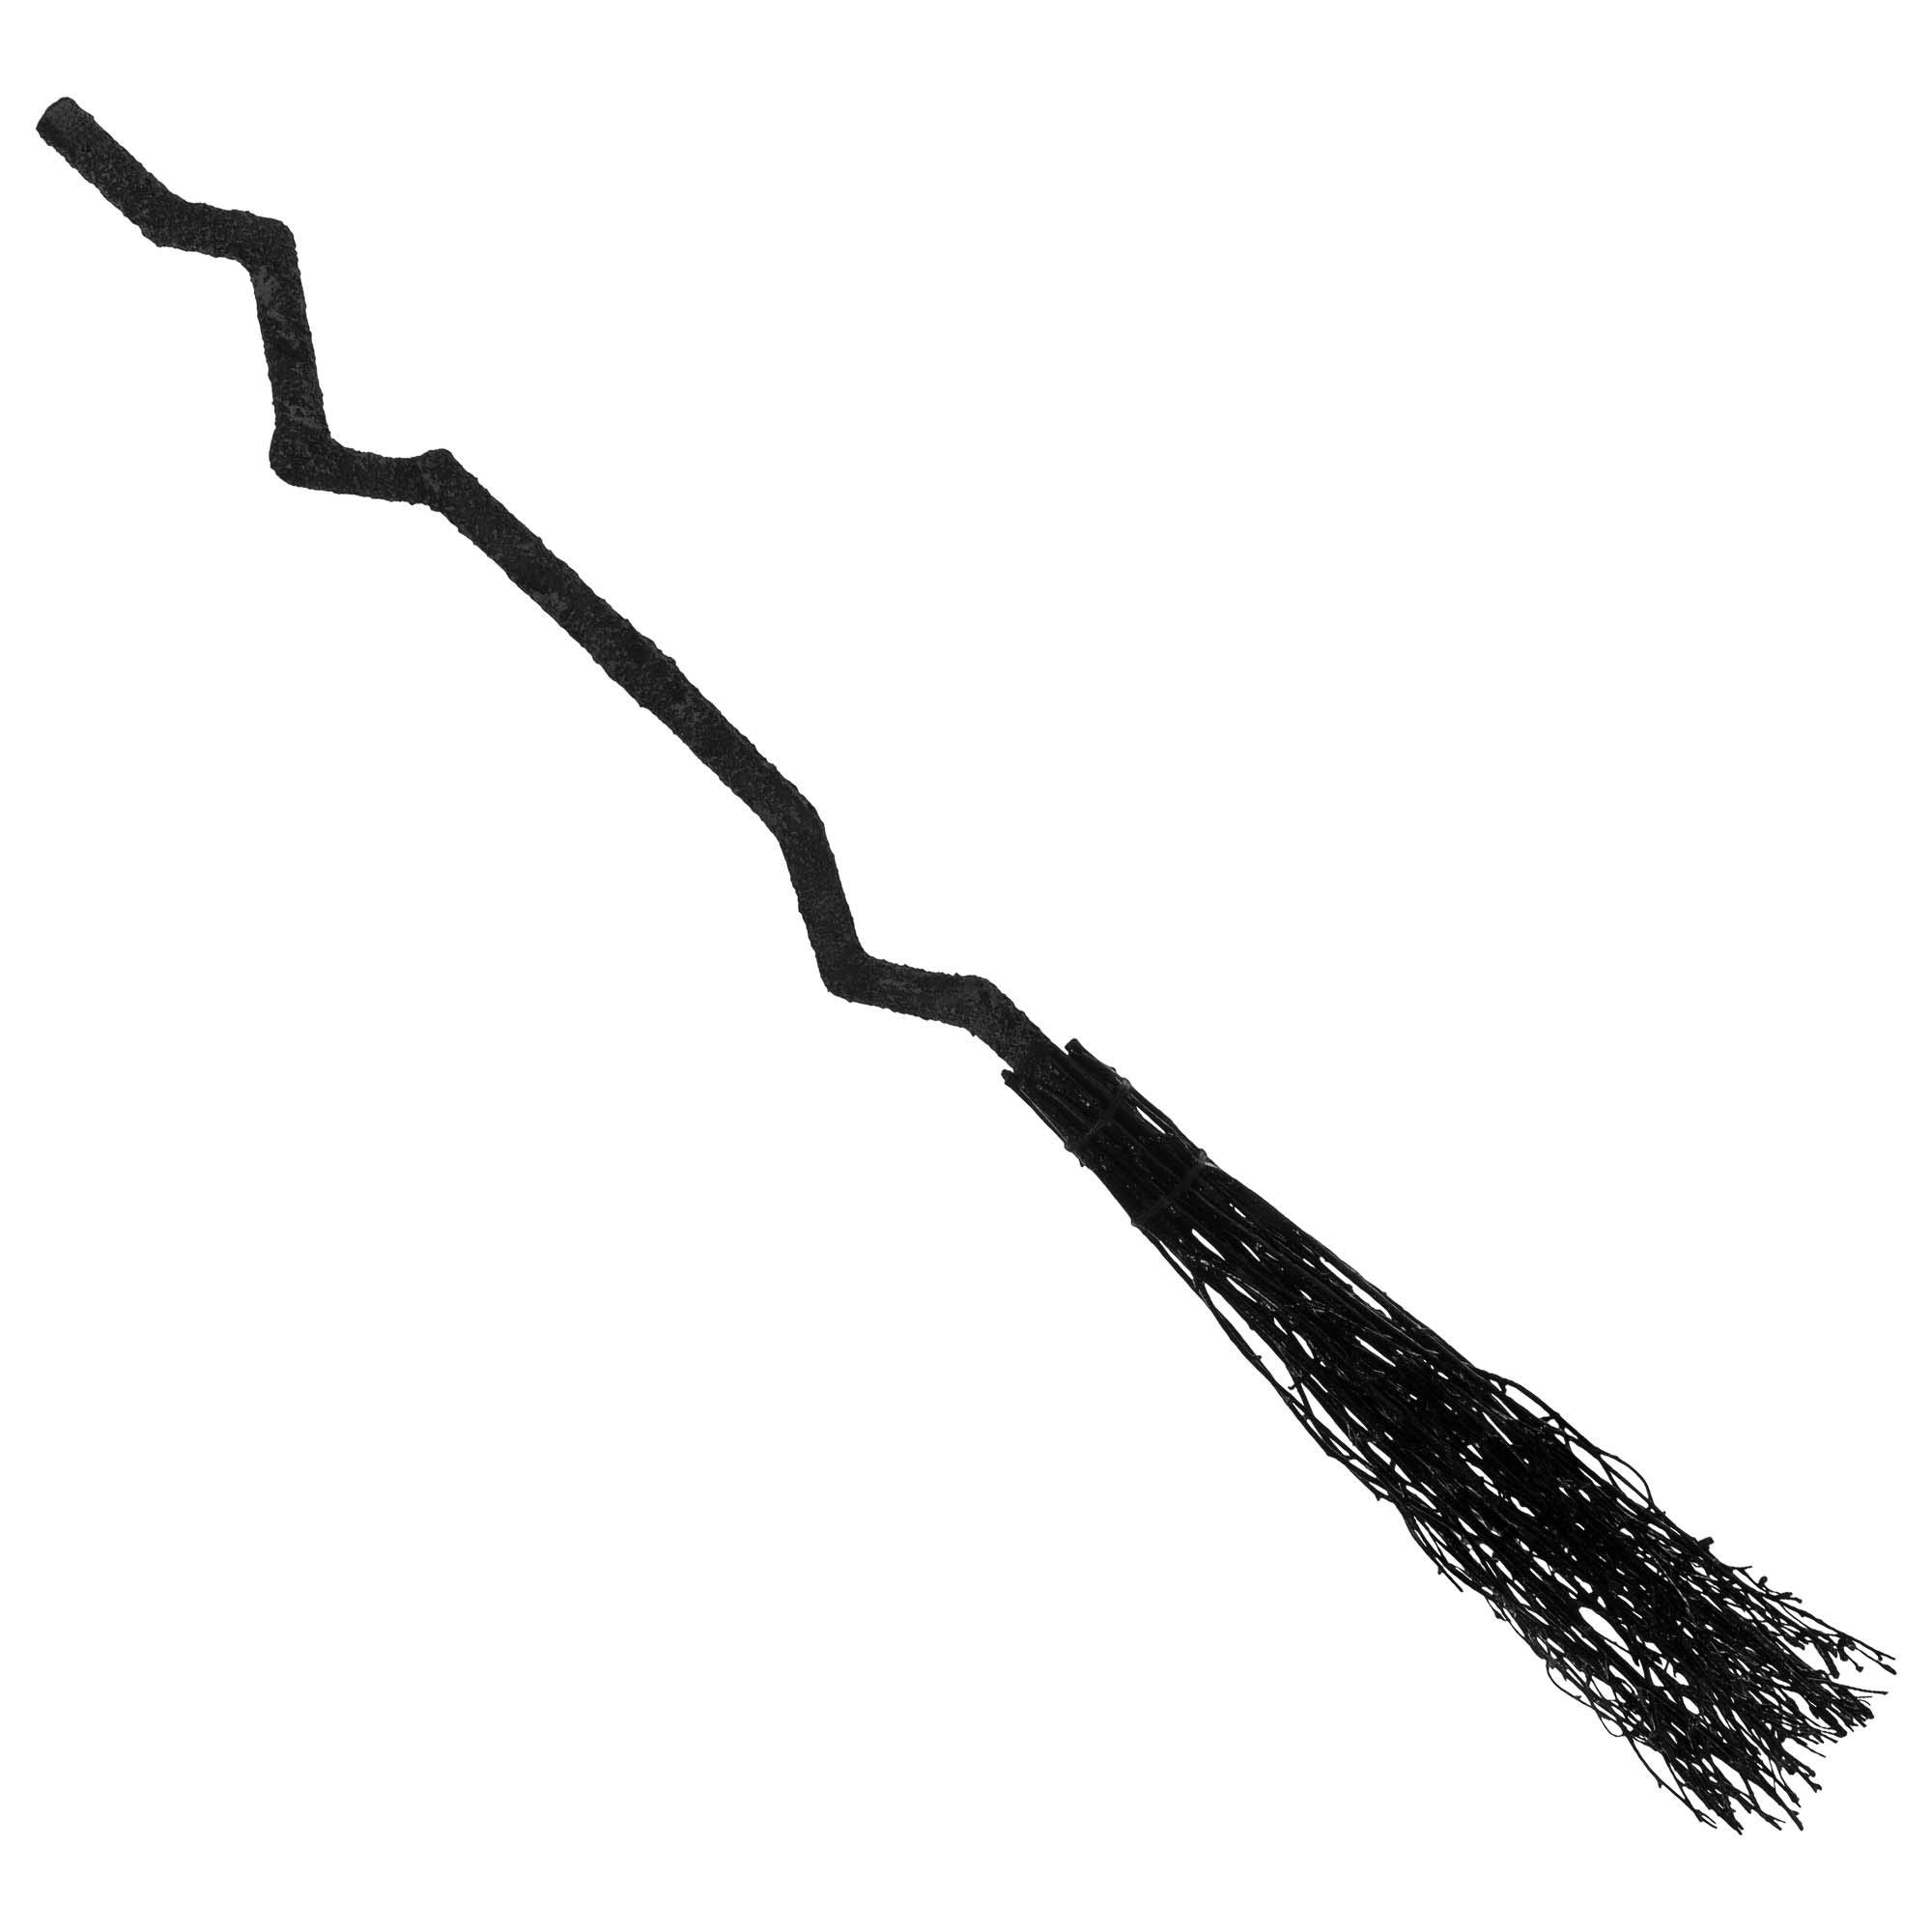 Amscan COSTUMES: ACCESSORIES Crooked Broom